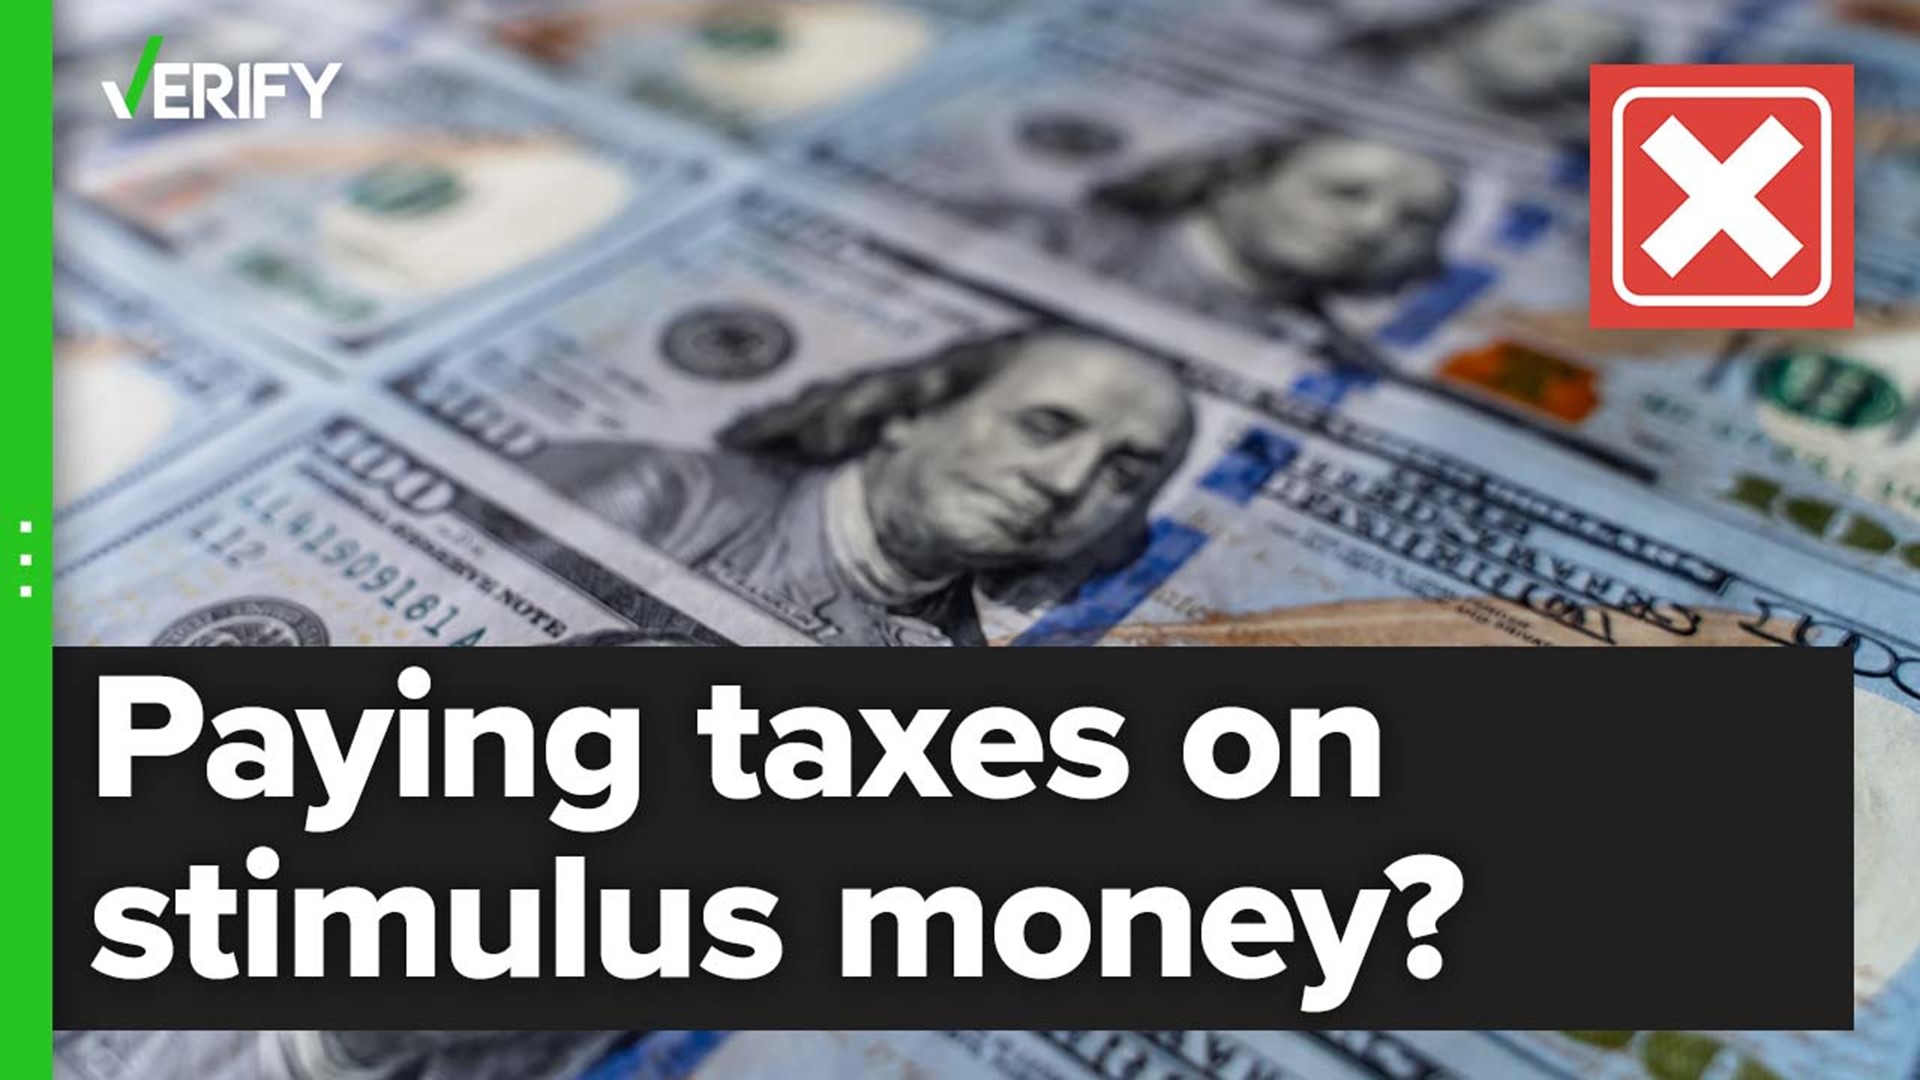 The IRS says the third stimulus check from the federal government is not considered gross income and is therefore not taxable.